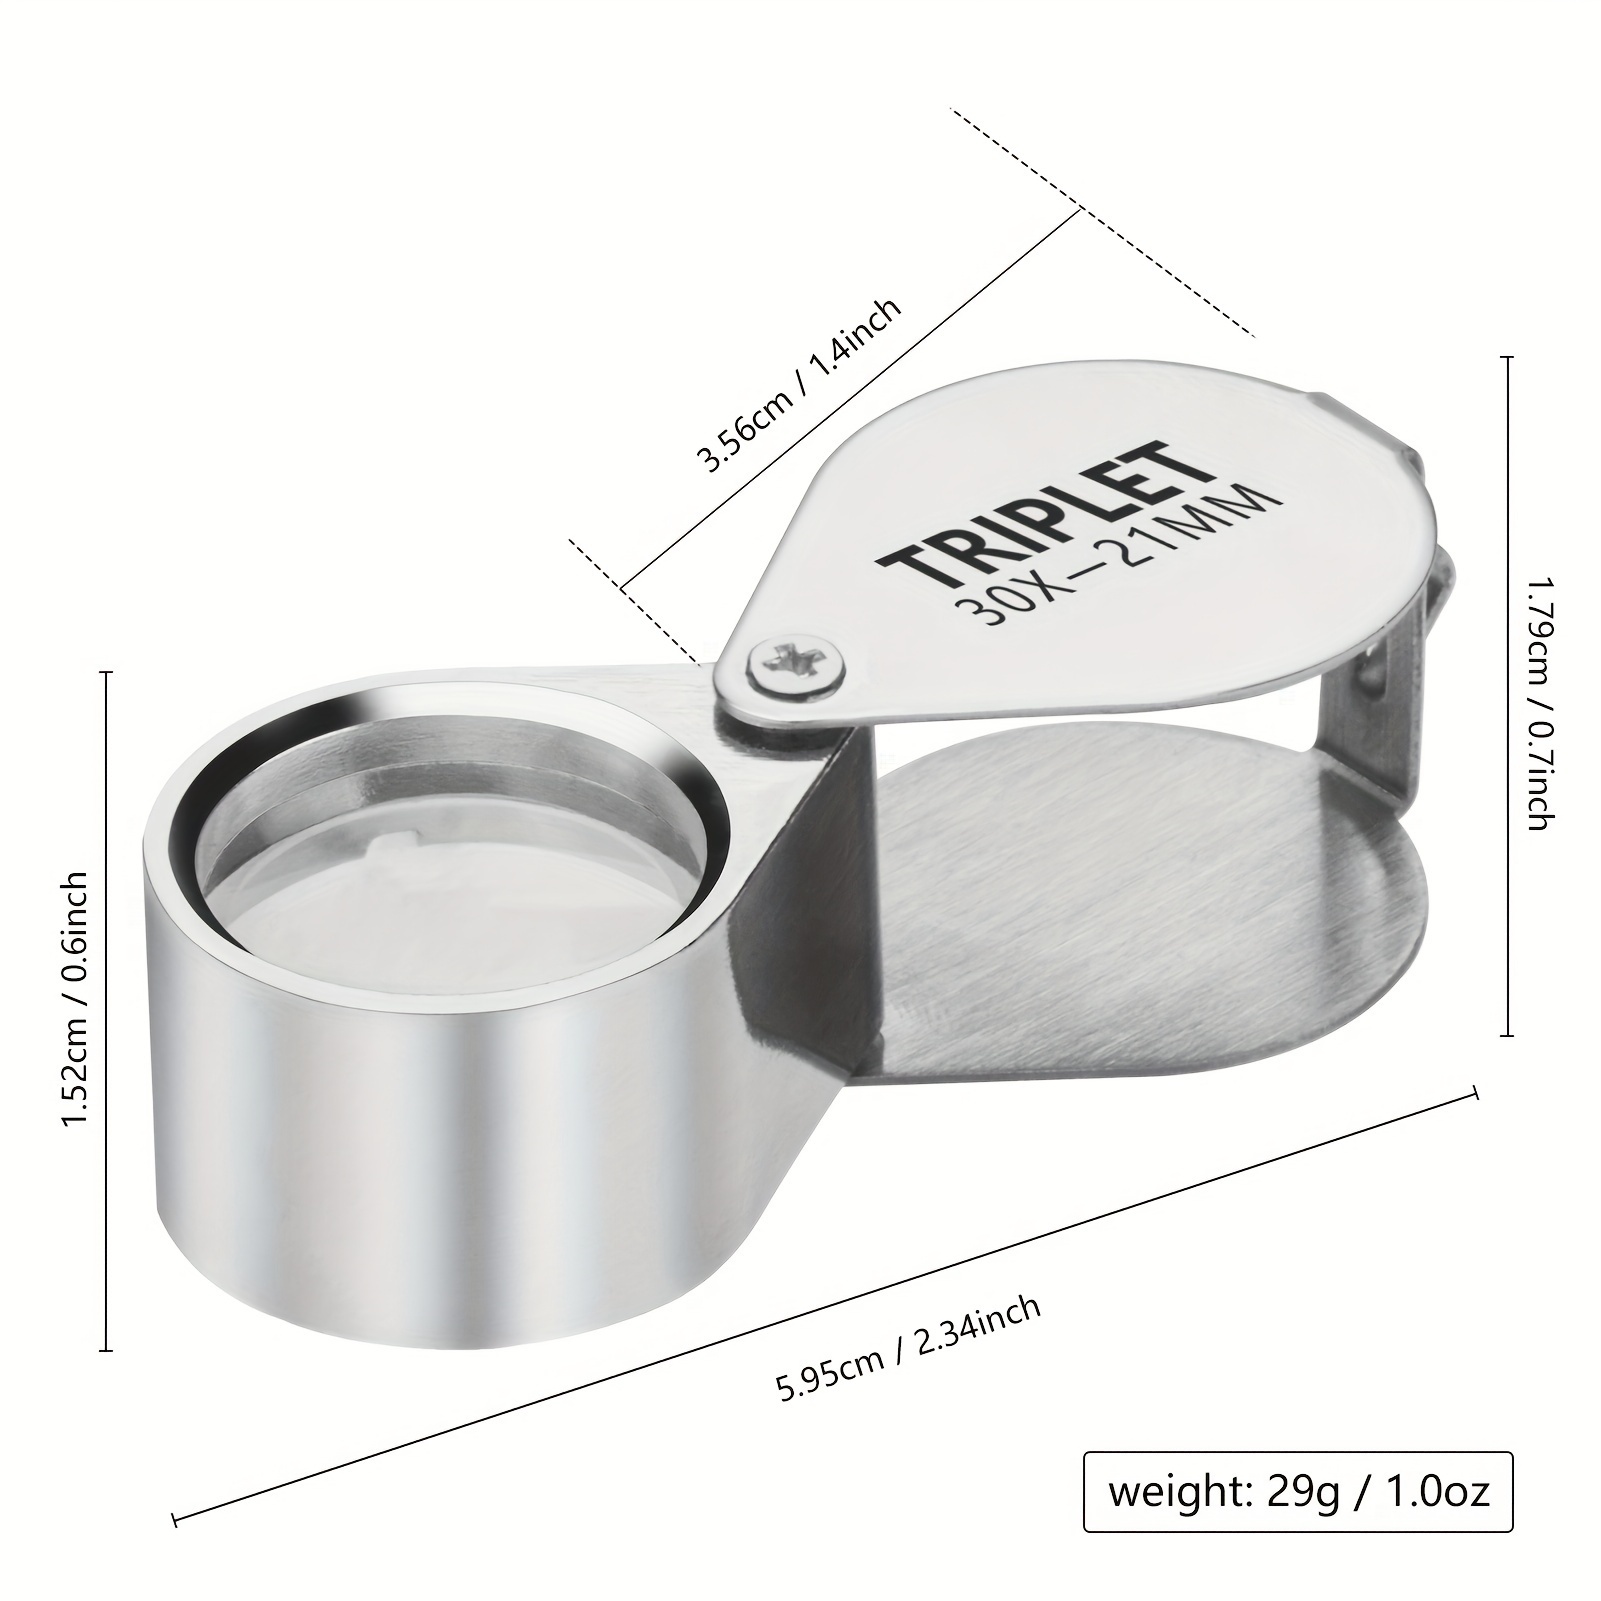 Wholesale Folding Mini Magnifying Glass For Jewelers, Stamps, Coins,  Watches, And Clock Repair Microscope 30X 26mm Folding Loupe For Antiques  Microscope Loupes CS30x26mm From Pbbands, $4.4